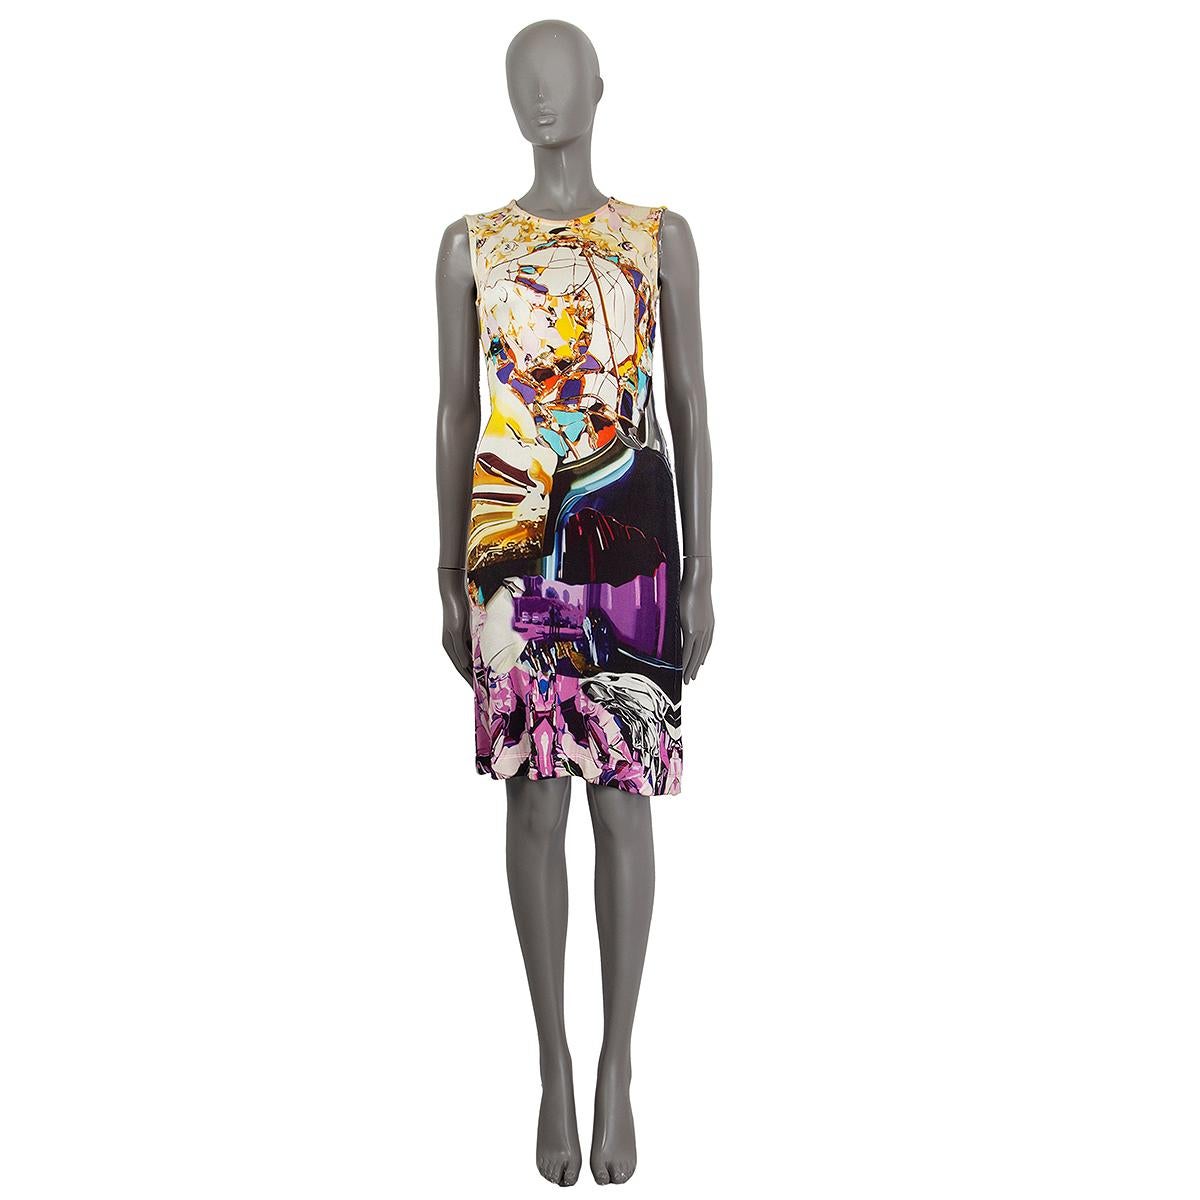 100% authentic Mary Katrantzou sleeveless bodycon jersey dress in multicolor viscose (95%), polyamide (3%) and elastane (2%). Unlined. Has been worn and is in excellent condition.

Measurements
Tag Size	S
Size	S
Bust	76cm (29.6in) to 86cm